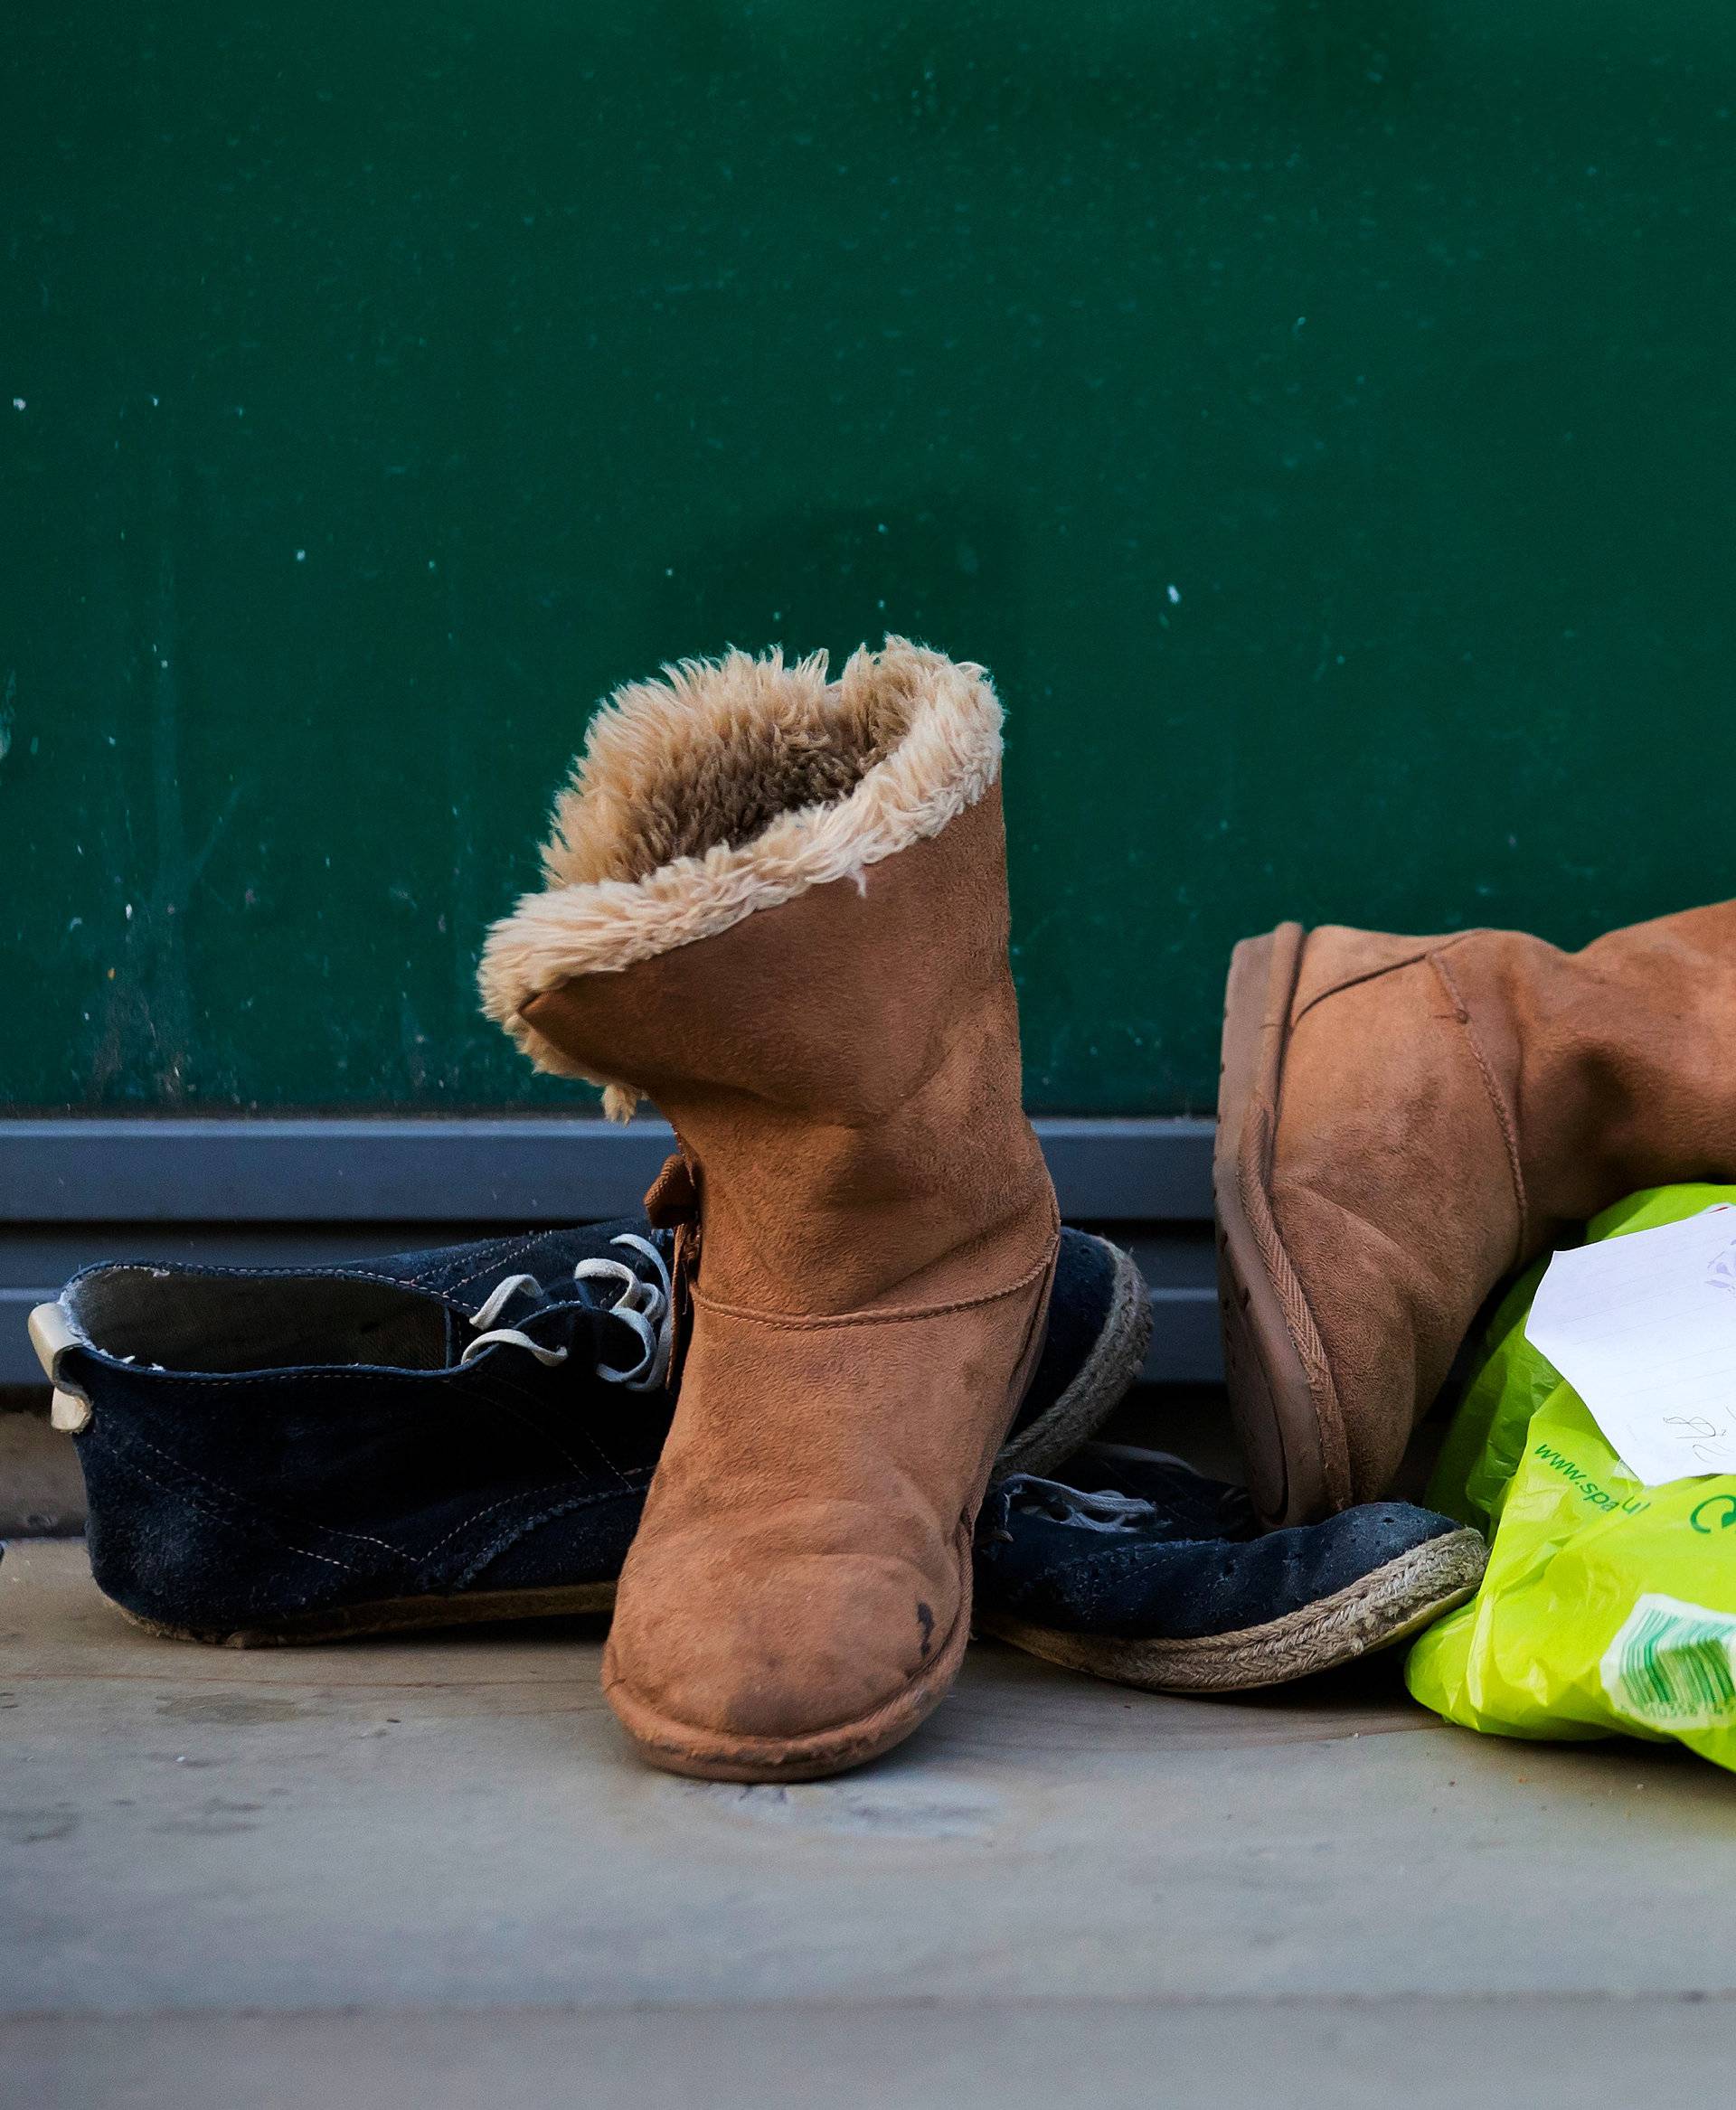 Shoes and personal belongings are seen near the Manchester Arena in central Manchester, Britain